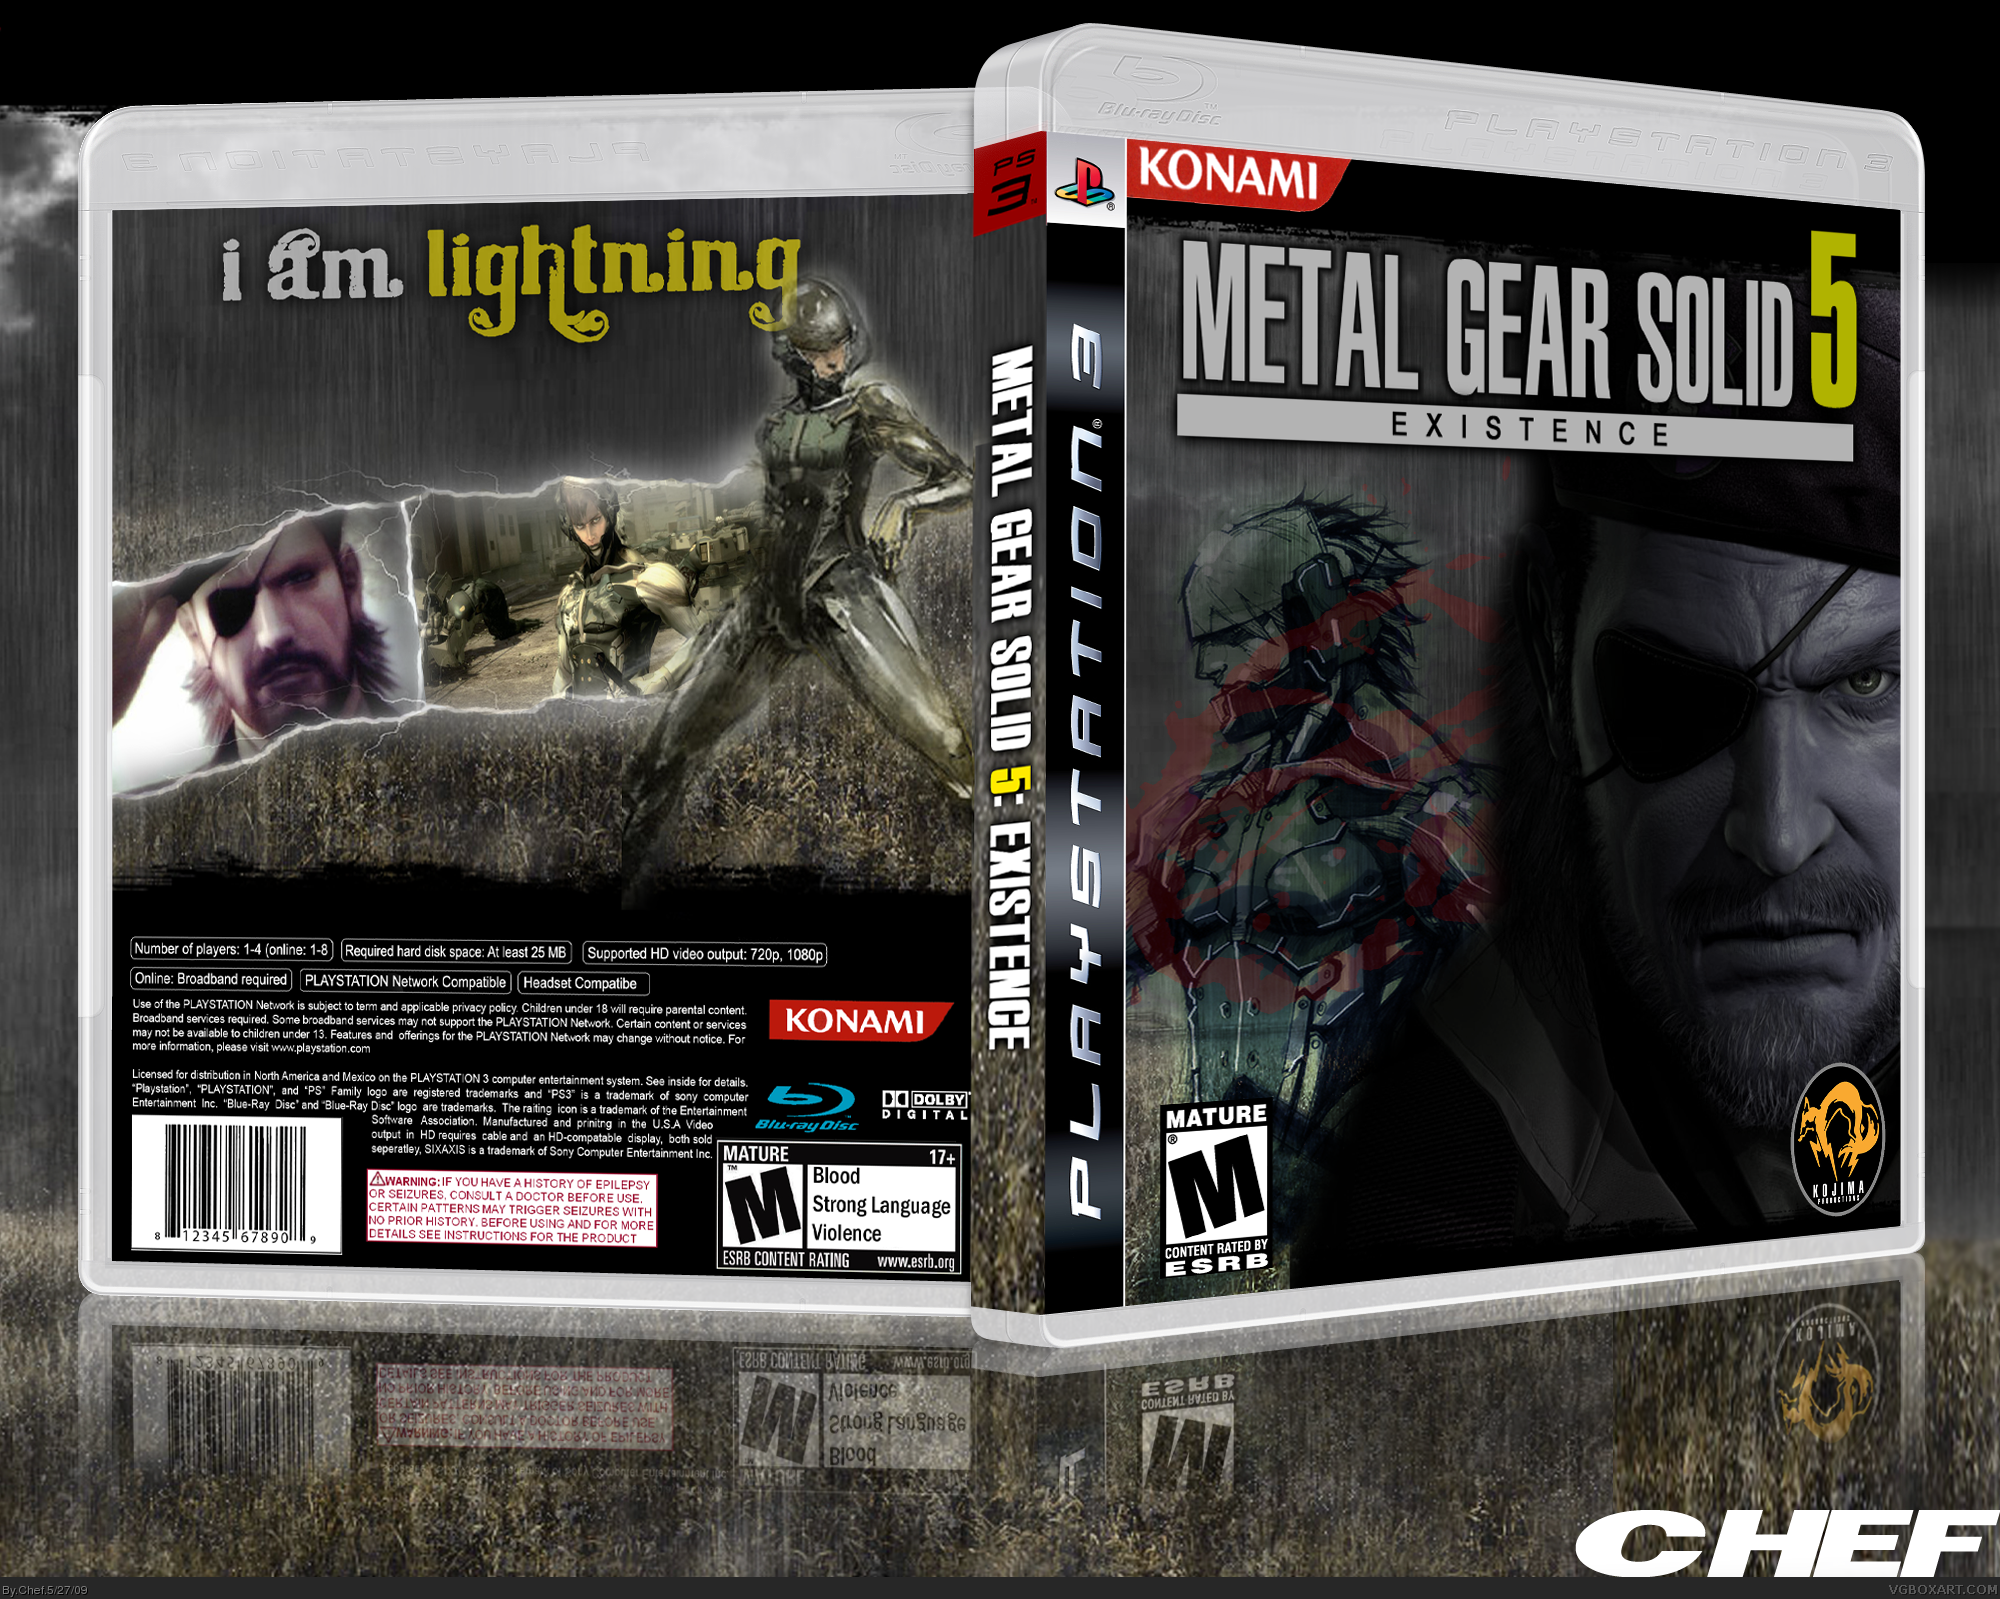 Metal Gear Solid 5: Existence box cover